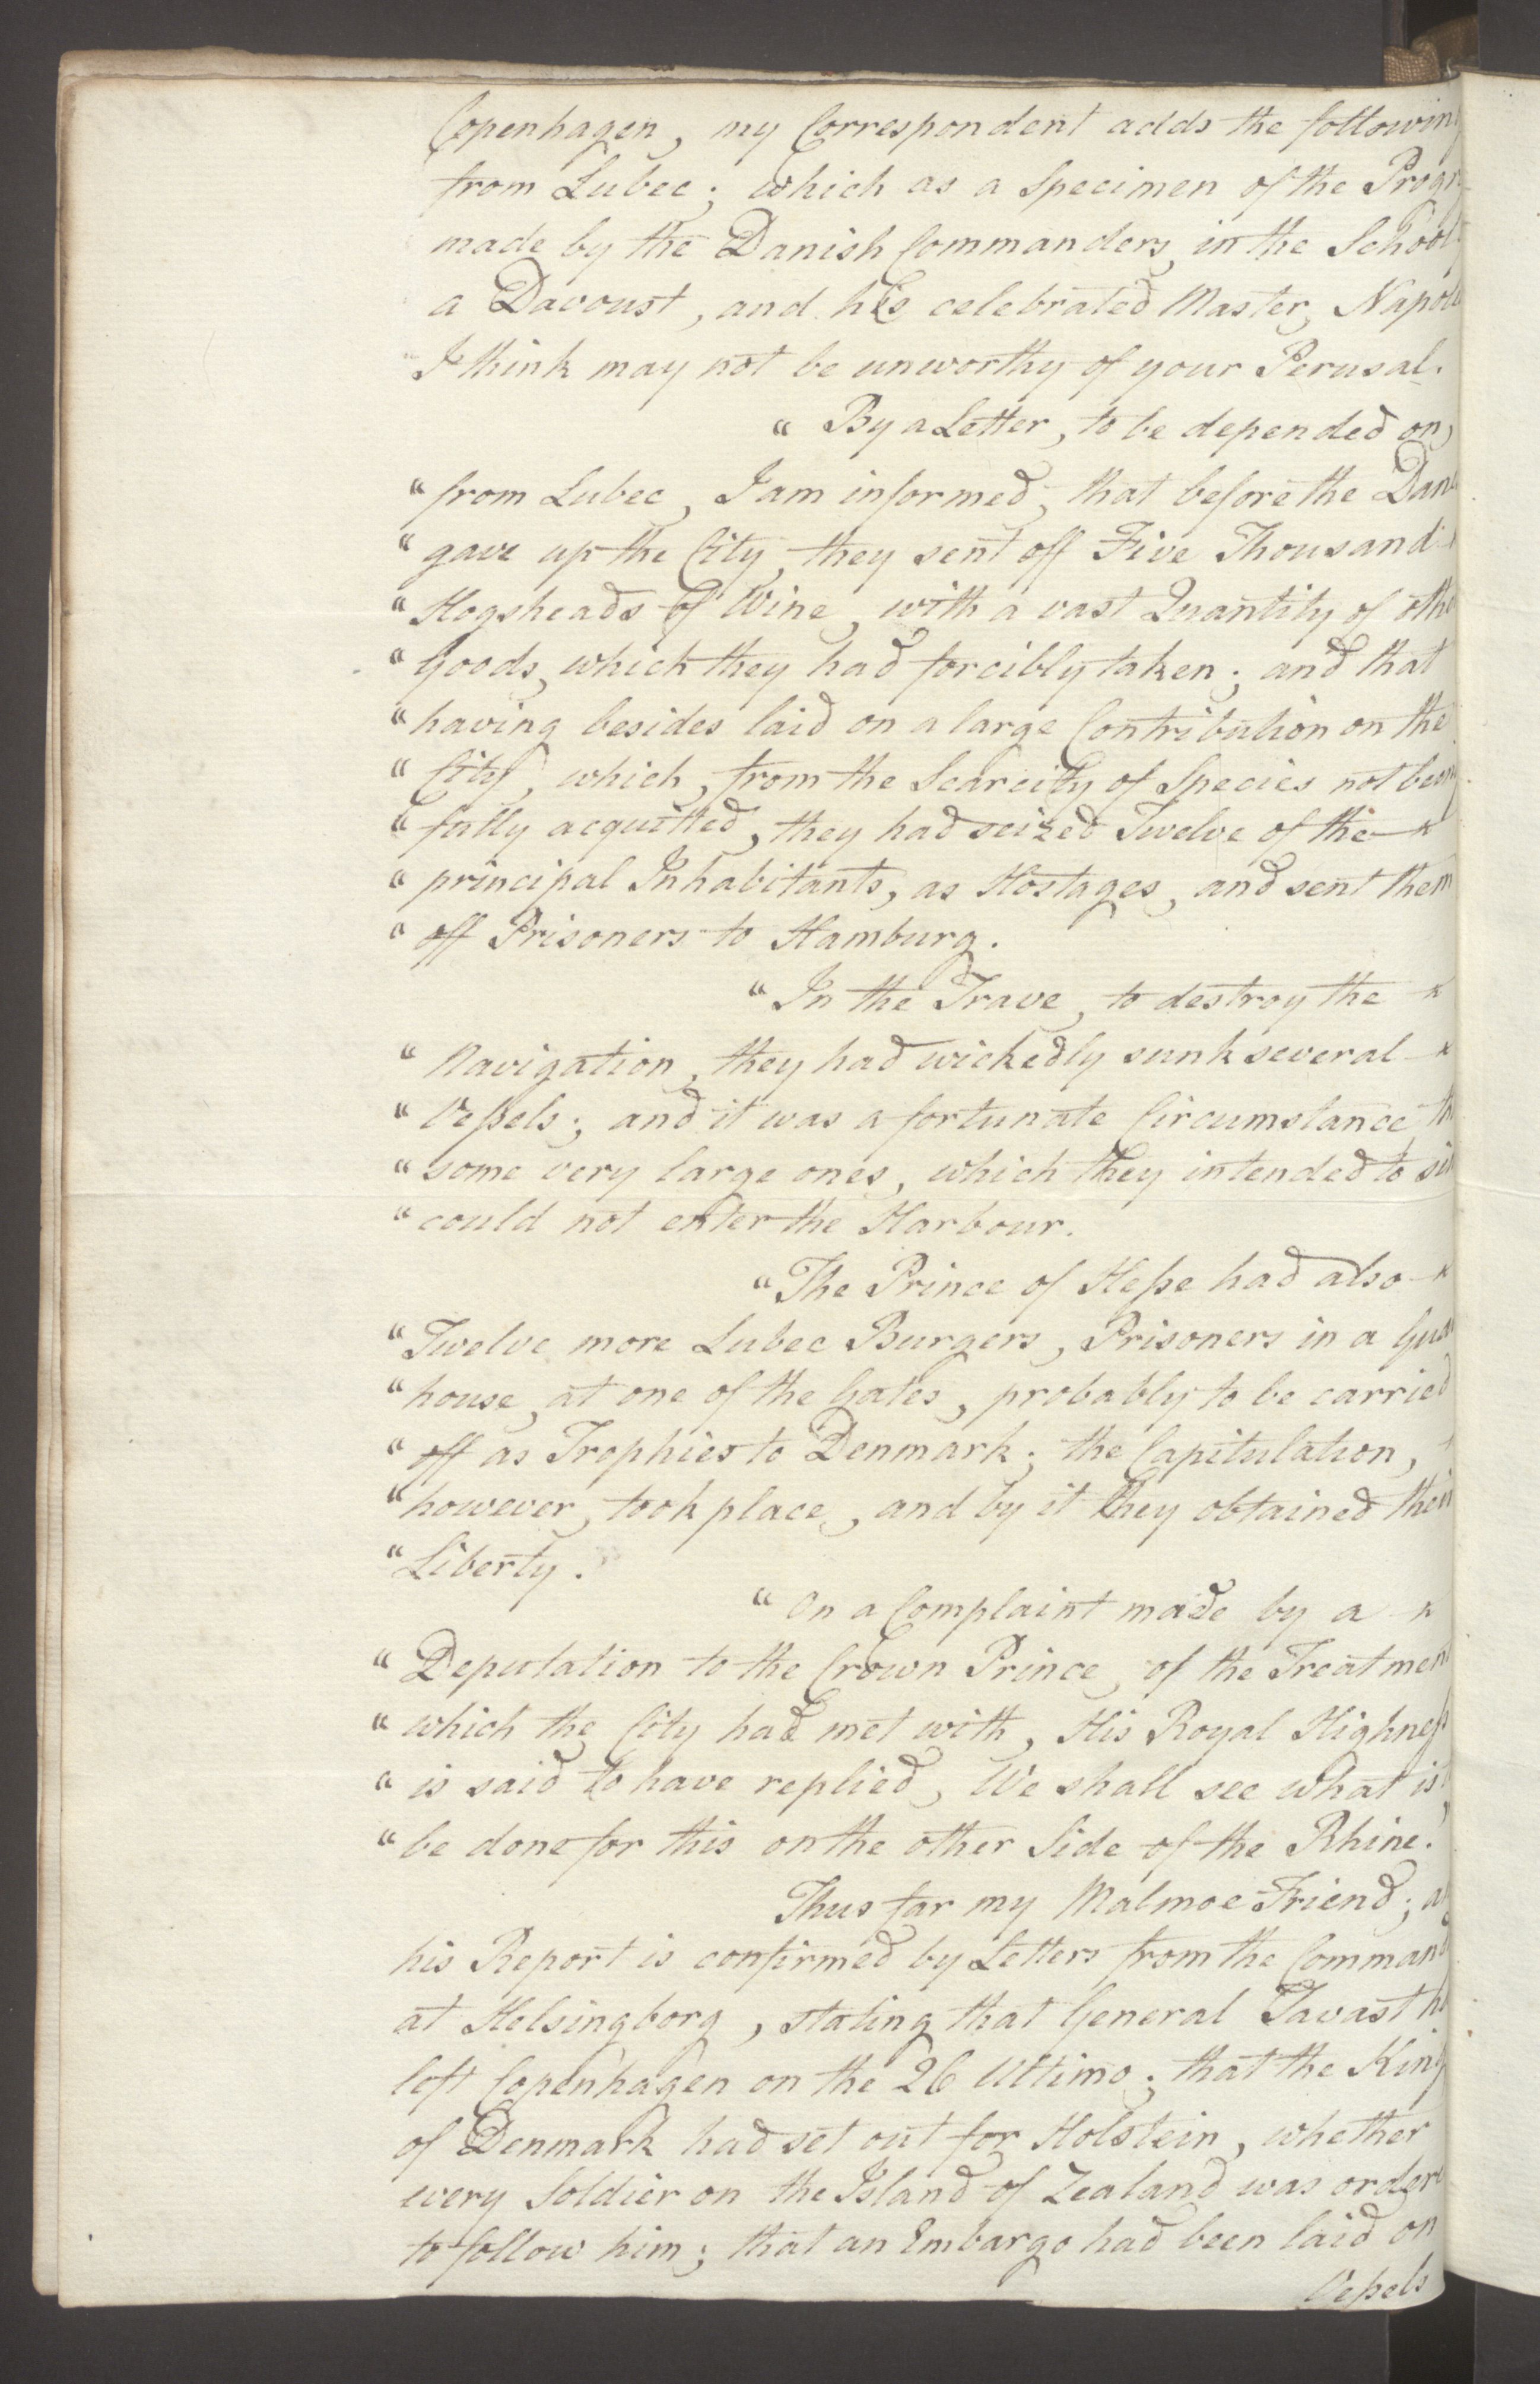 Foreign Office*, UKA/-/FO 38/16: Sir C. Gordon. Reports from Malmö, Jonkoping, and Helsingborg, 1814, s. 4